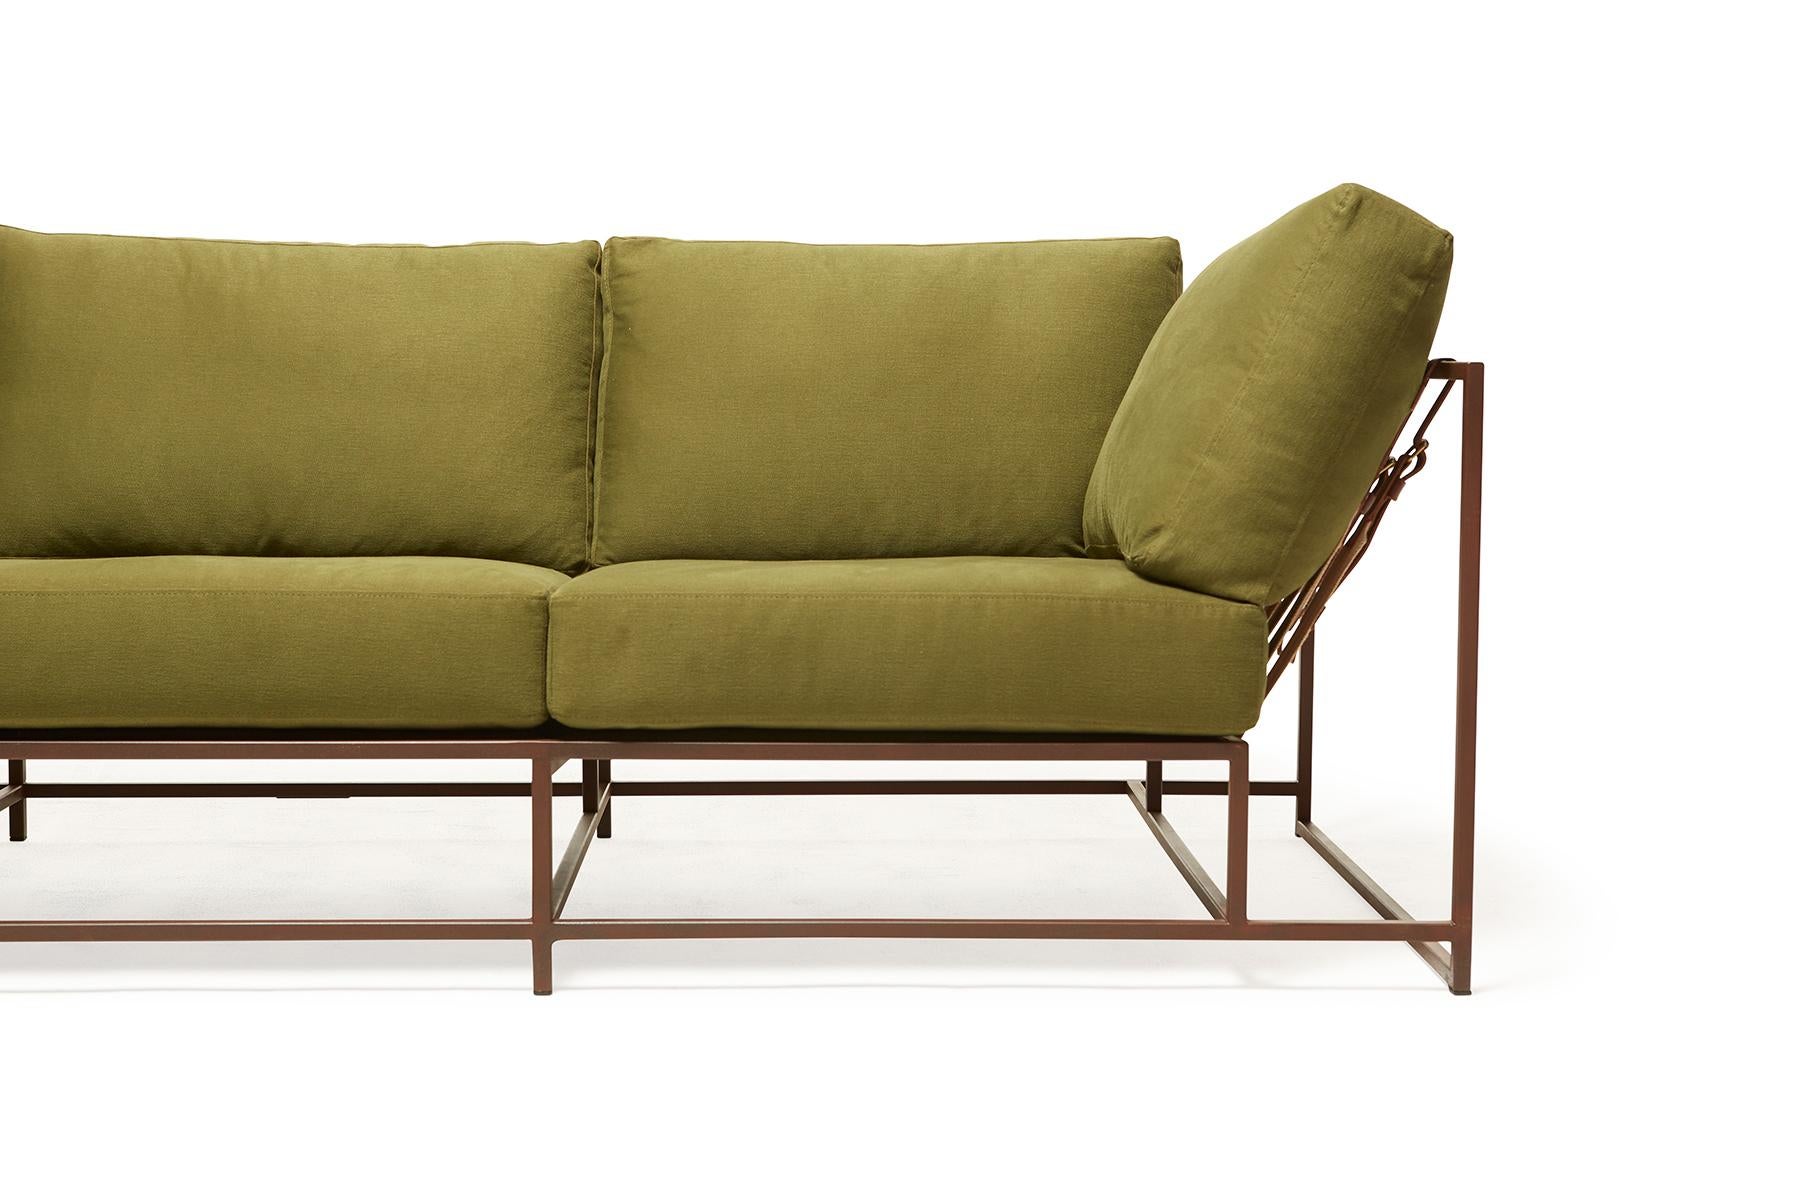 American Olive Twill Canvas and Marbled Rust Sofa For Sale